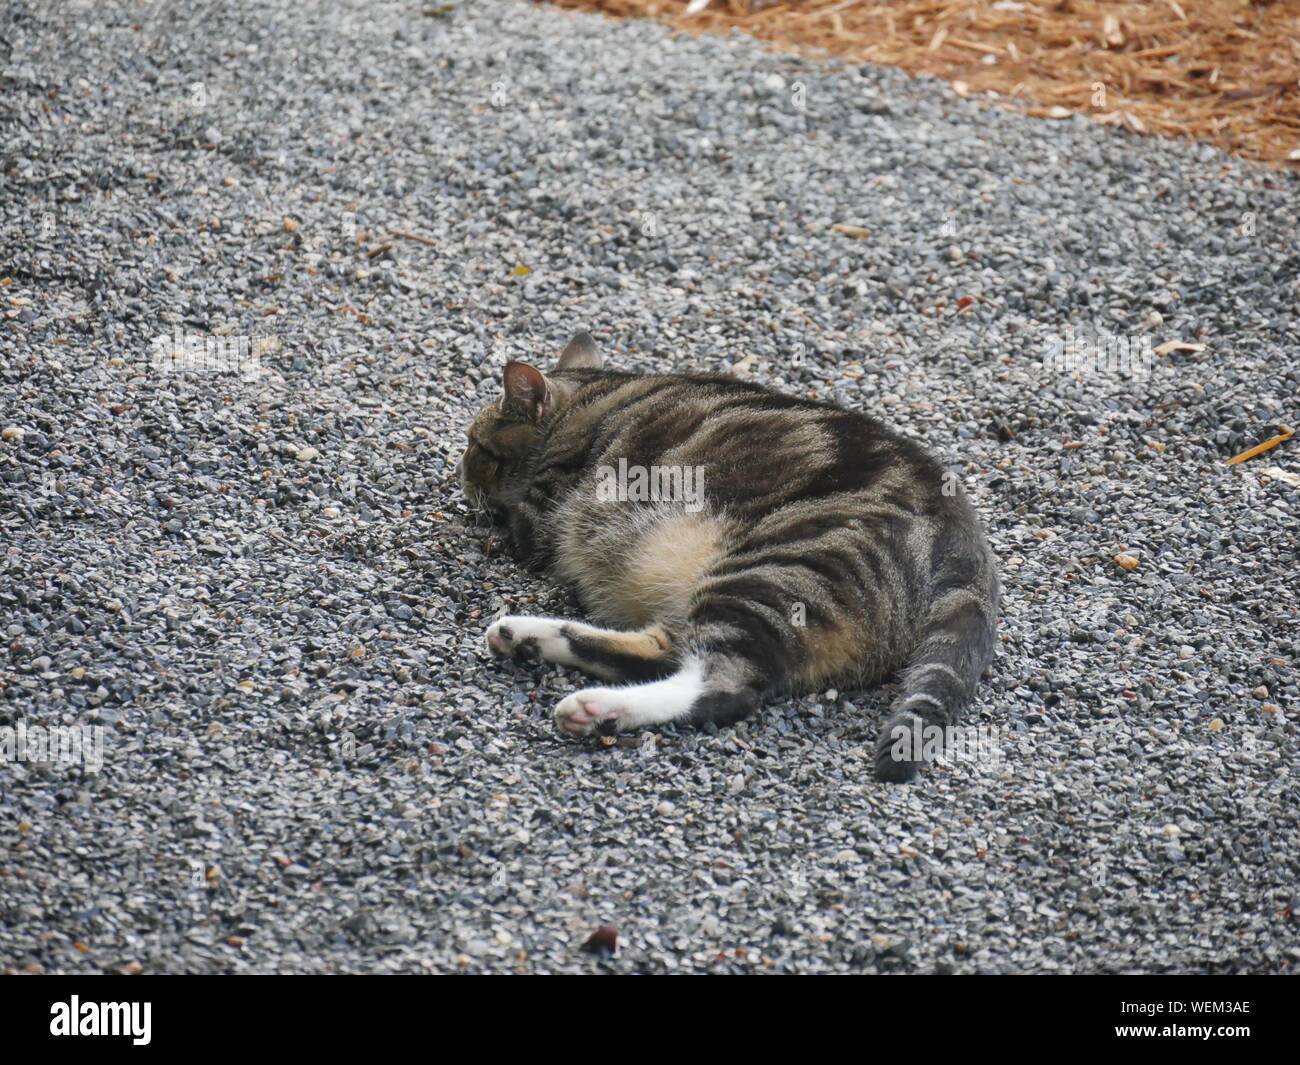 A pampered tabby sleeps on the ground at the Ernest Hemingway house in Key West, Florida. Stock Photo